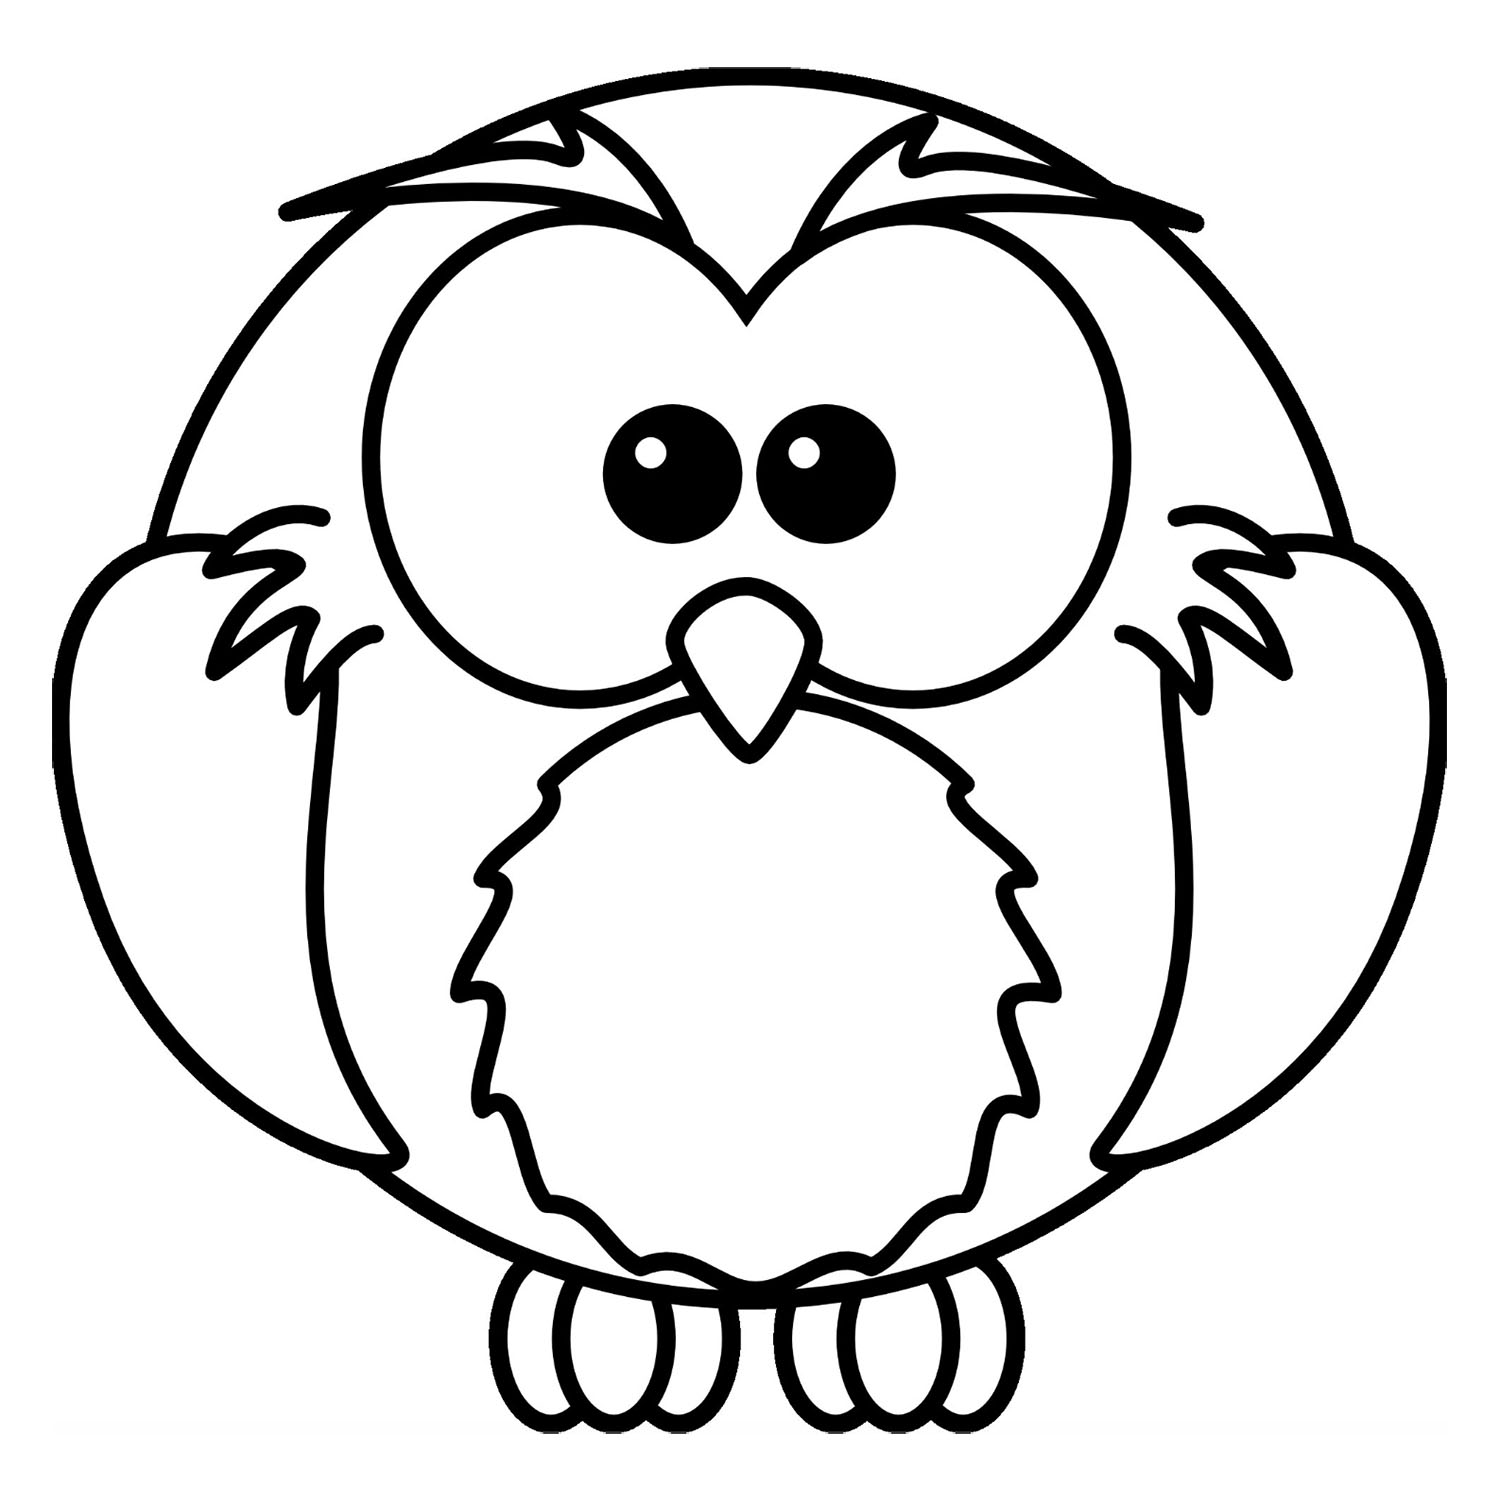 Simple free Birds coloring page to print and color